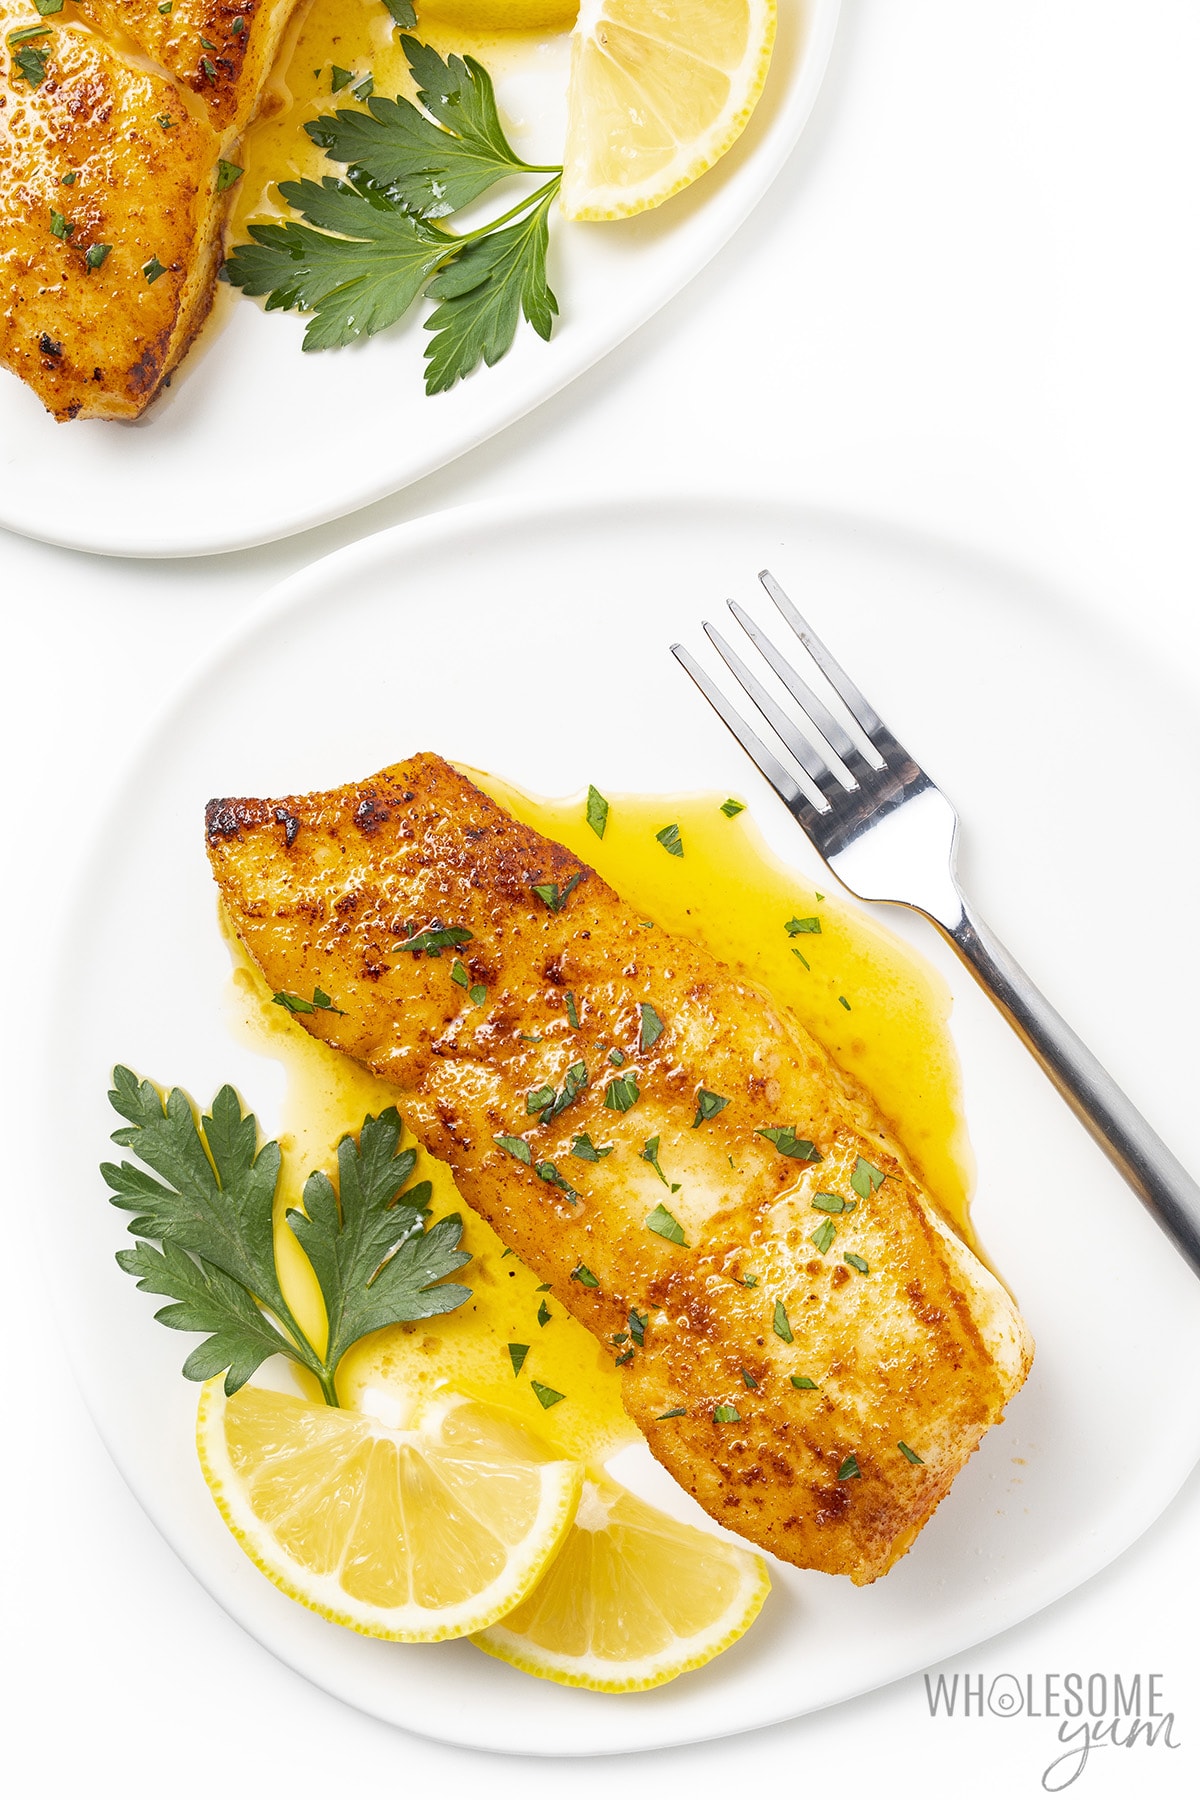 One of the best halibut recipes on the plate.